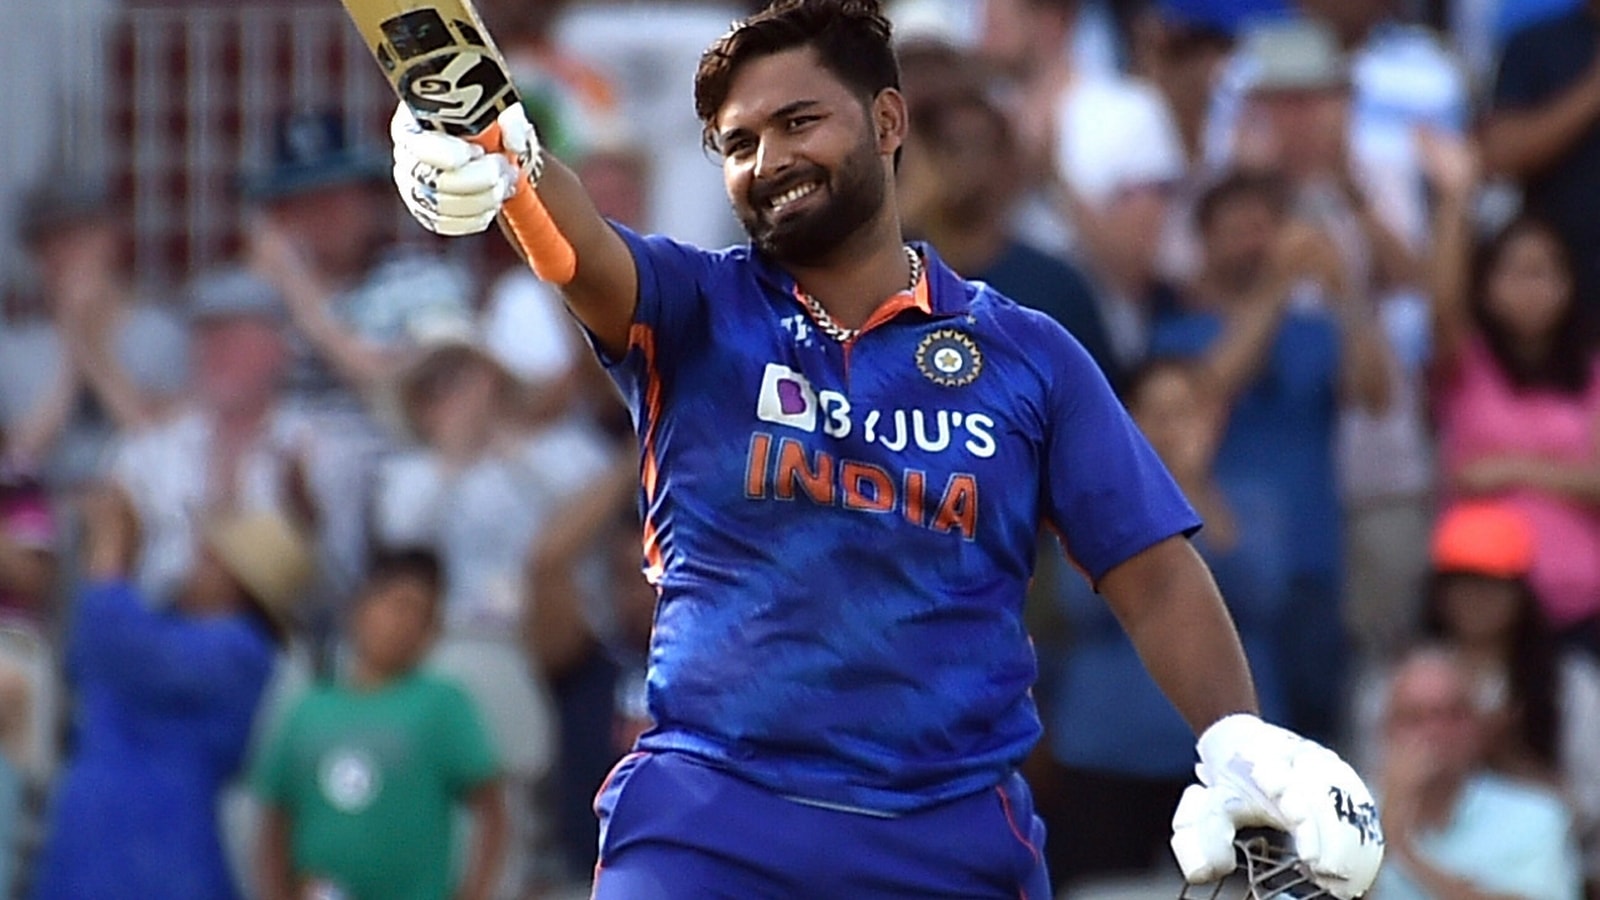 Rishabh Pant eclipses Dhoni with magnificent ton, leads India to ODI series  win | Cricket - Hindustan Times